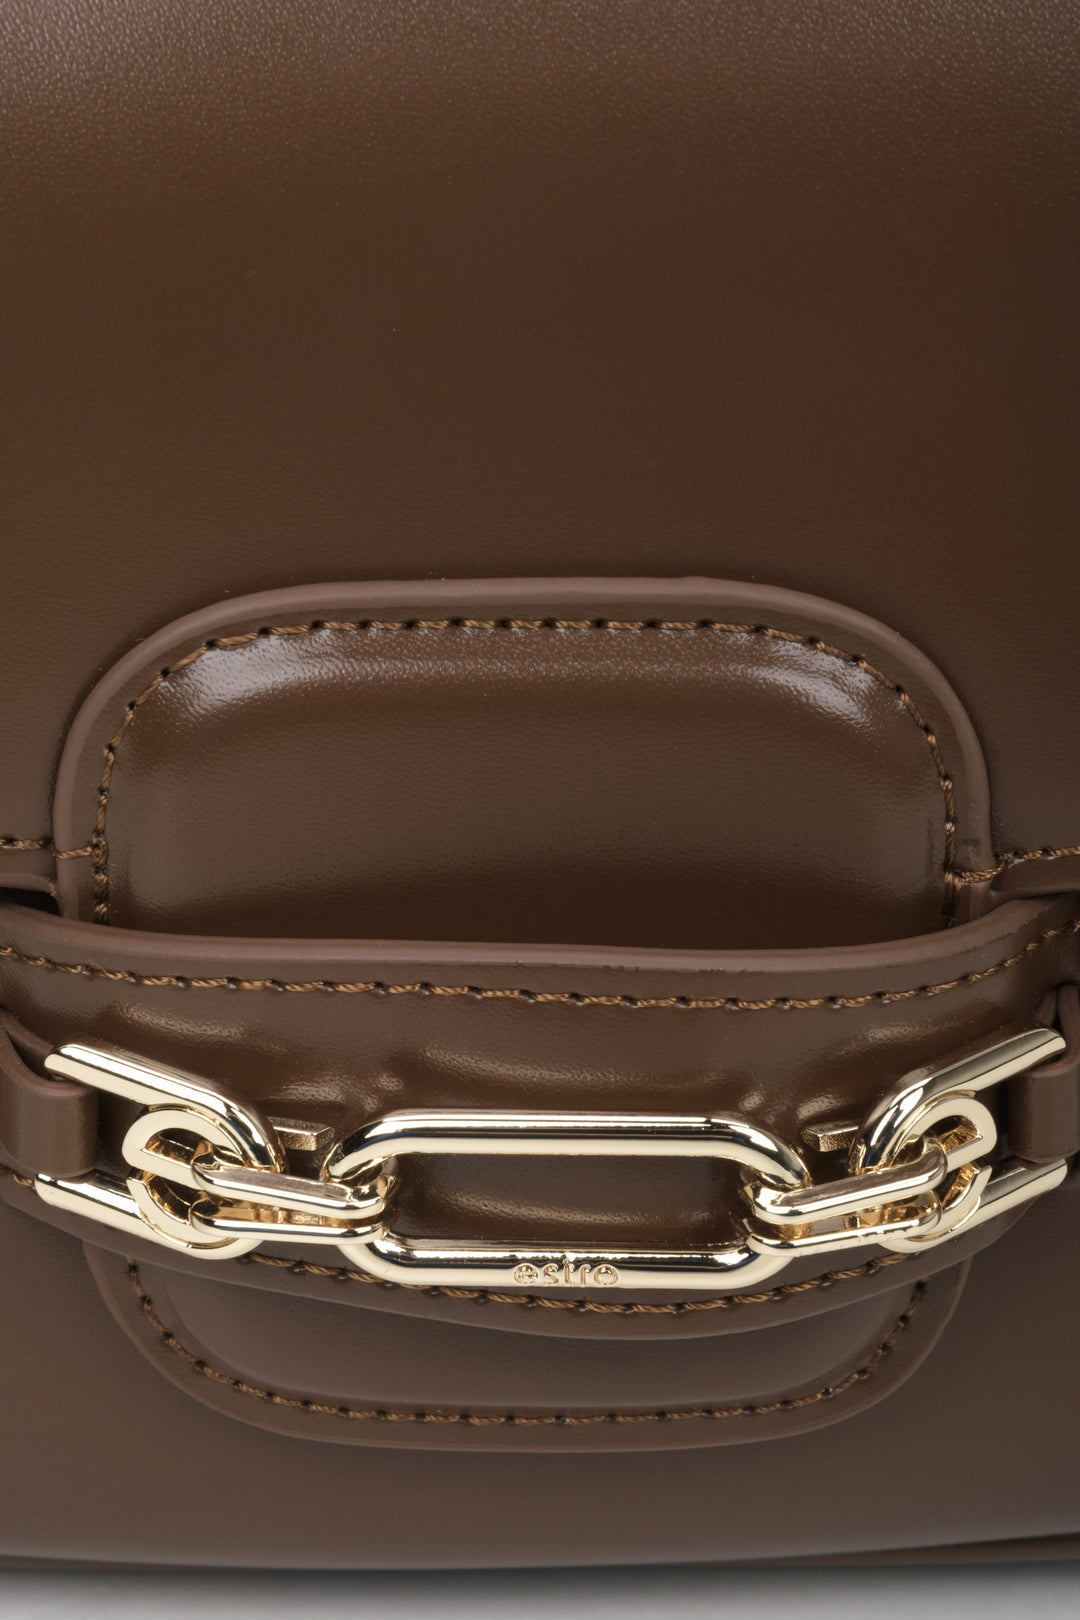 Women's brown leather bag - close-up on the detail.